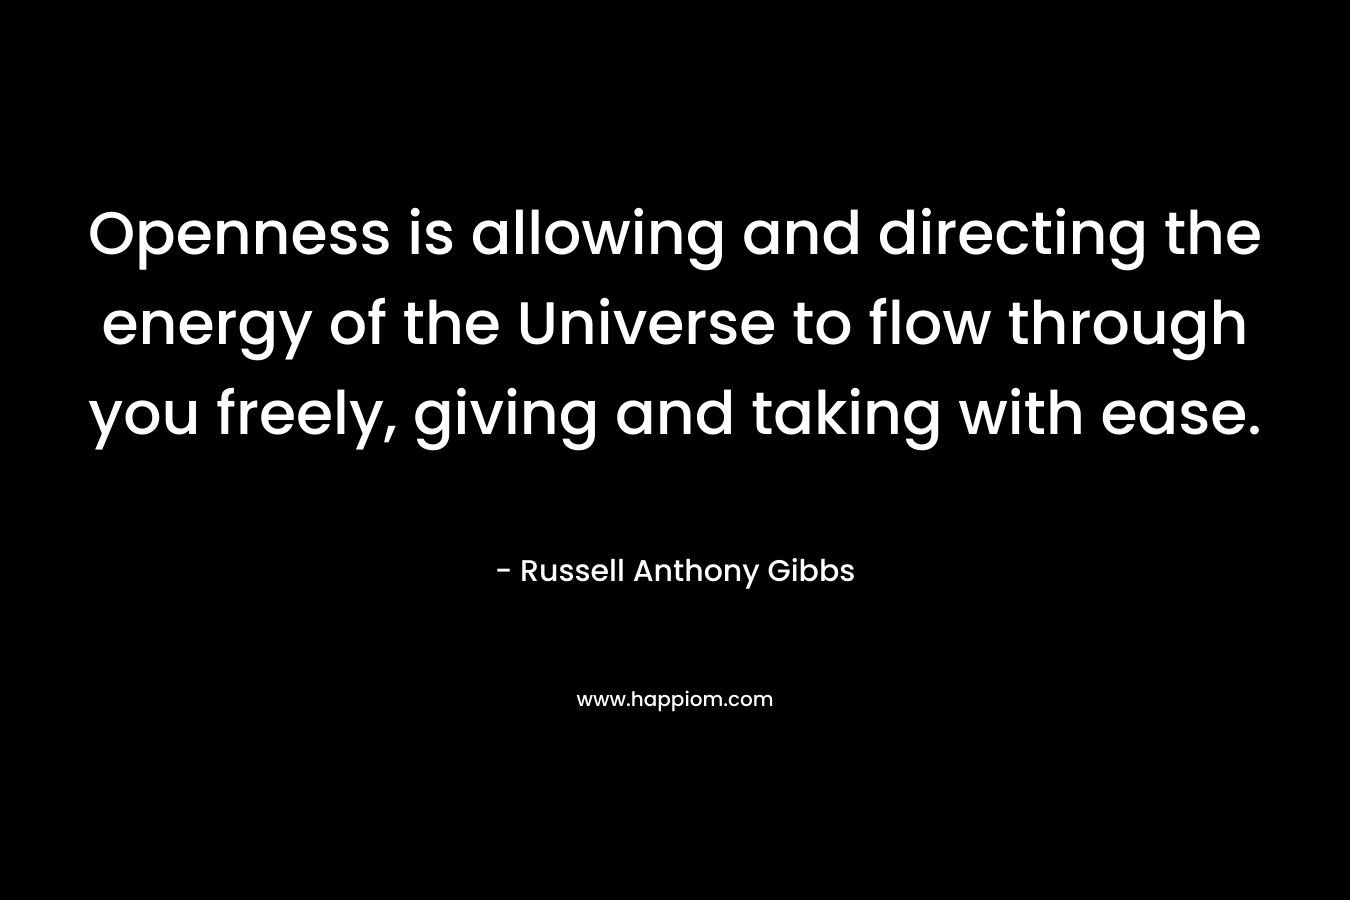 Openness is allowing and directing the energy of the Universe to flow through you freely, giving and taking with ease.